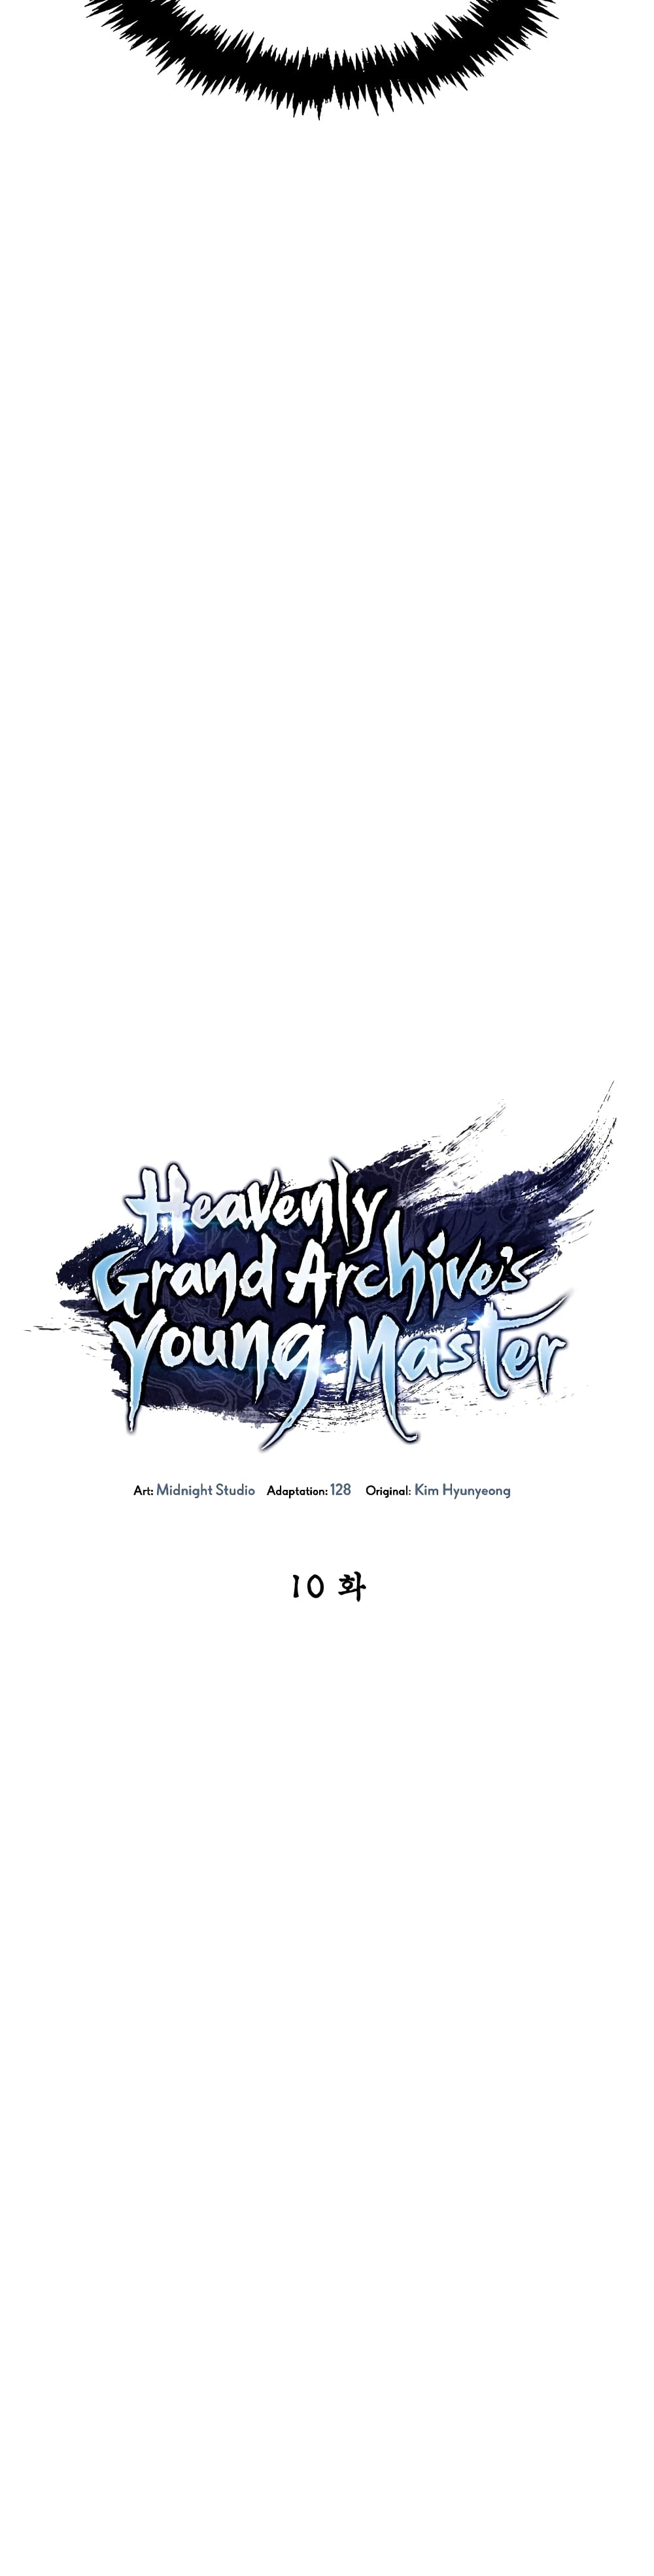 Heavenly Grand Archive’s Young Master 10 (3)